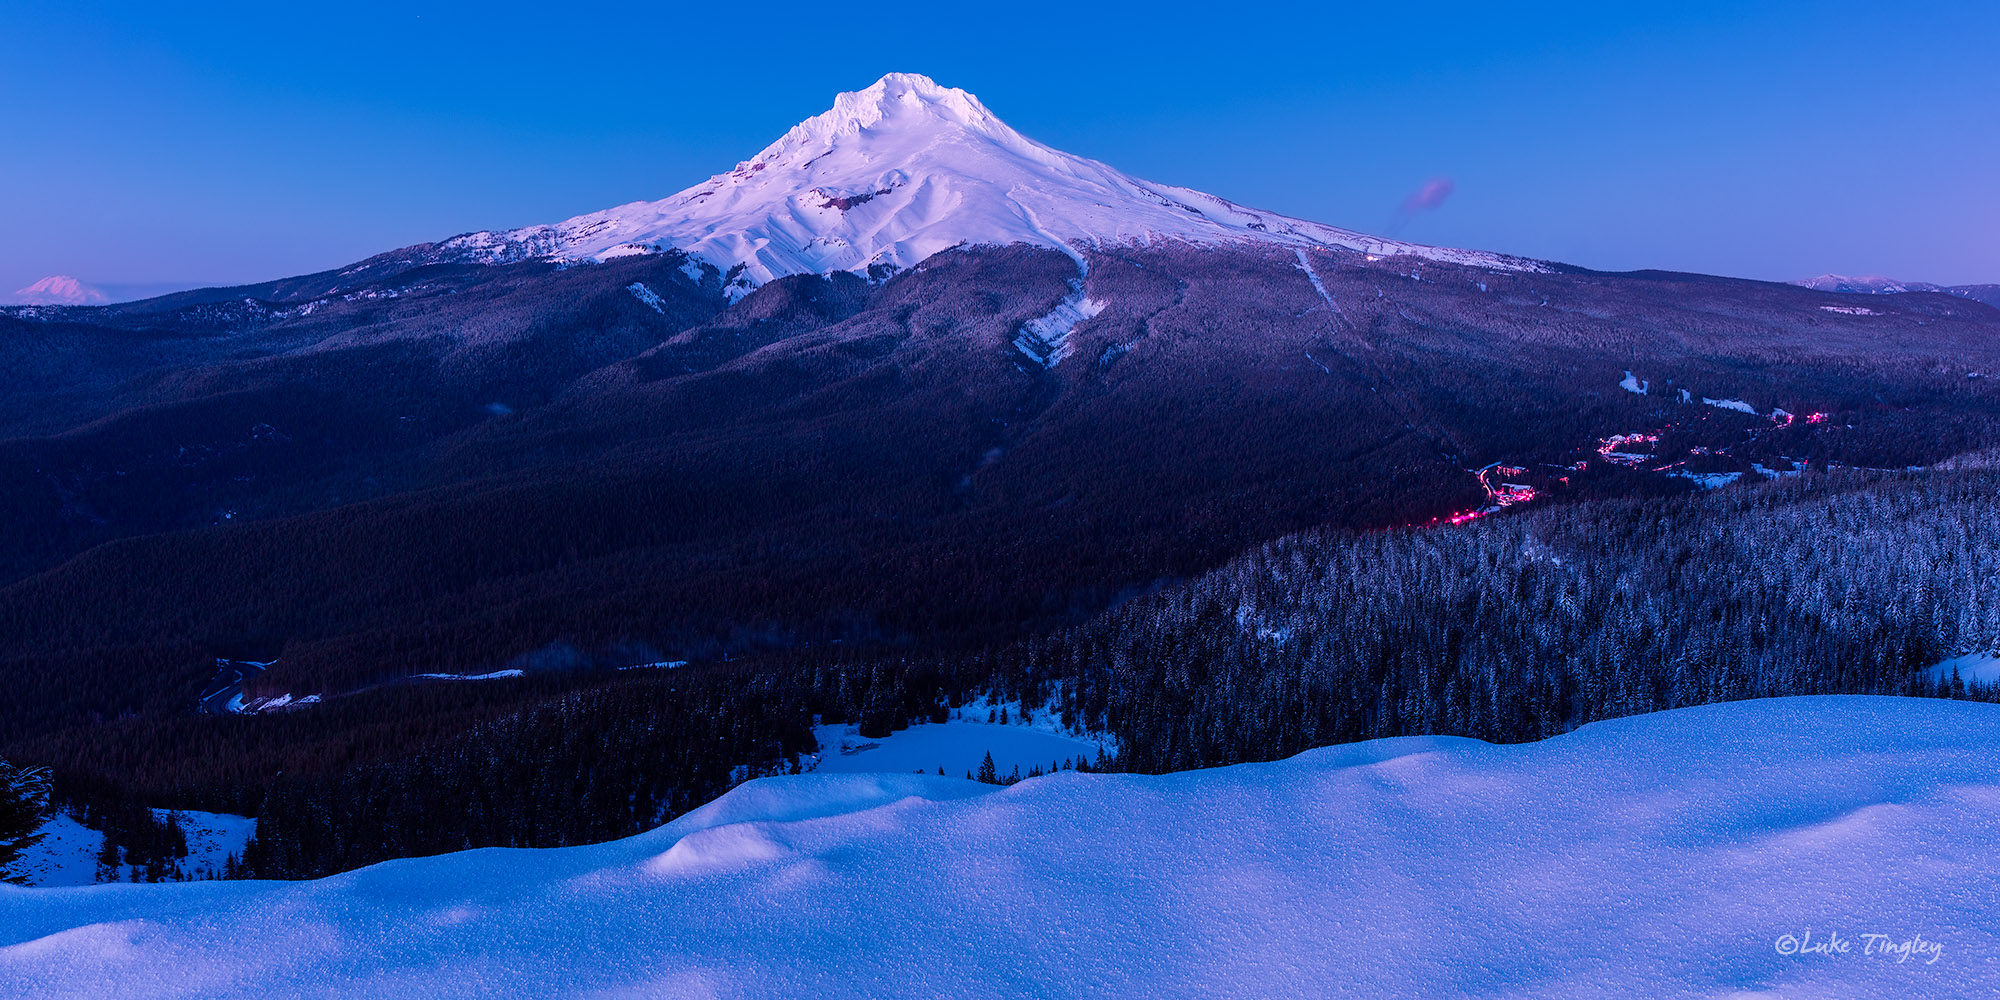 The iconic Mt Hood in the twilight hour.